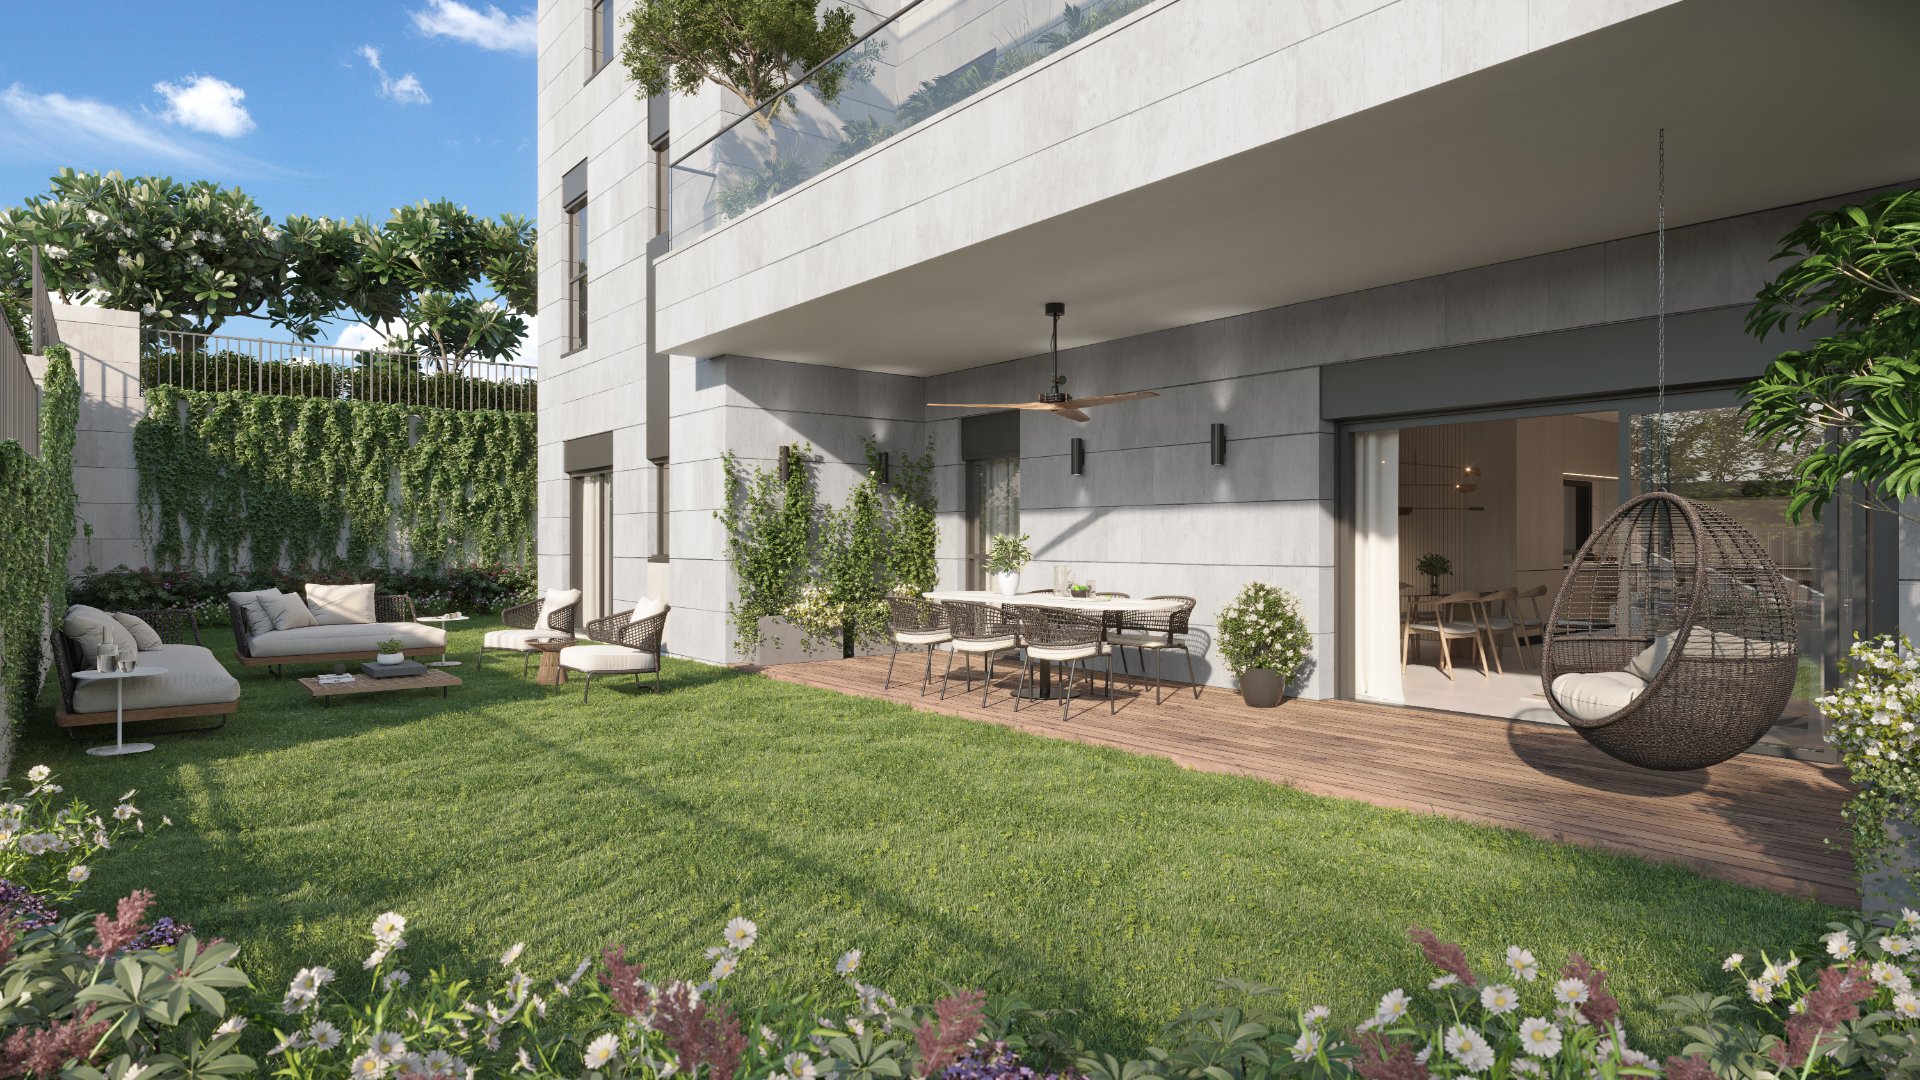 Photograph from the garden apartment of Kiryat Ata's project